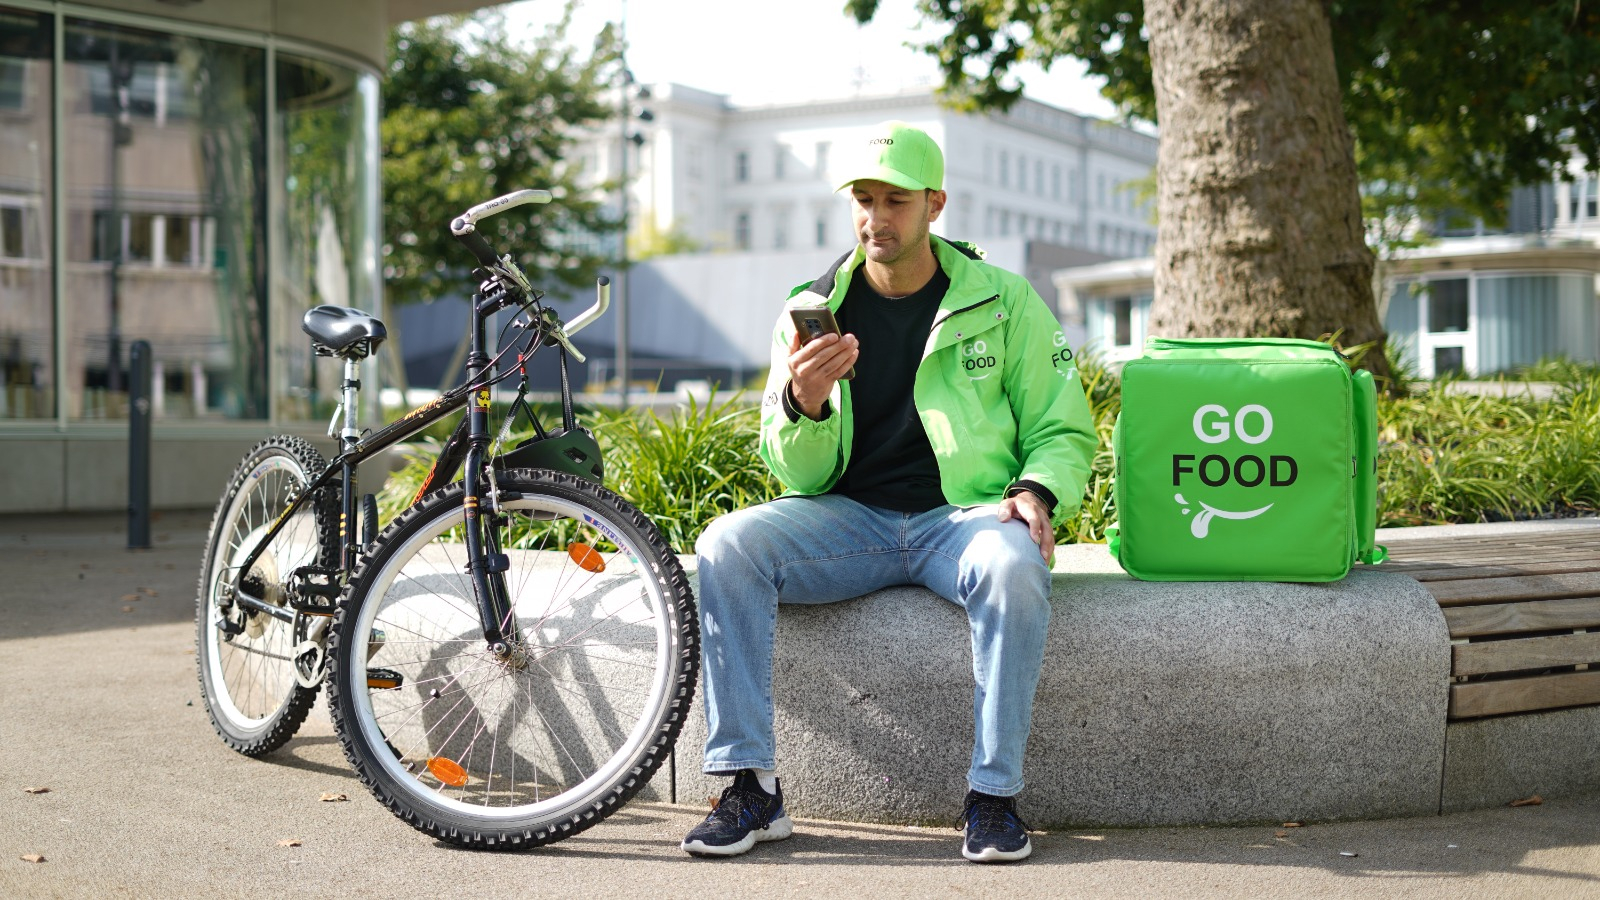 Food delivery worker in ‘GO FOOD’ attire taking a break on a bench with their bicycle and delivery bag nearby, amidst an urban backdrop.